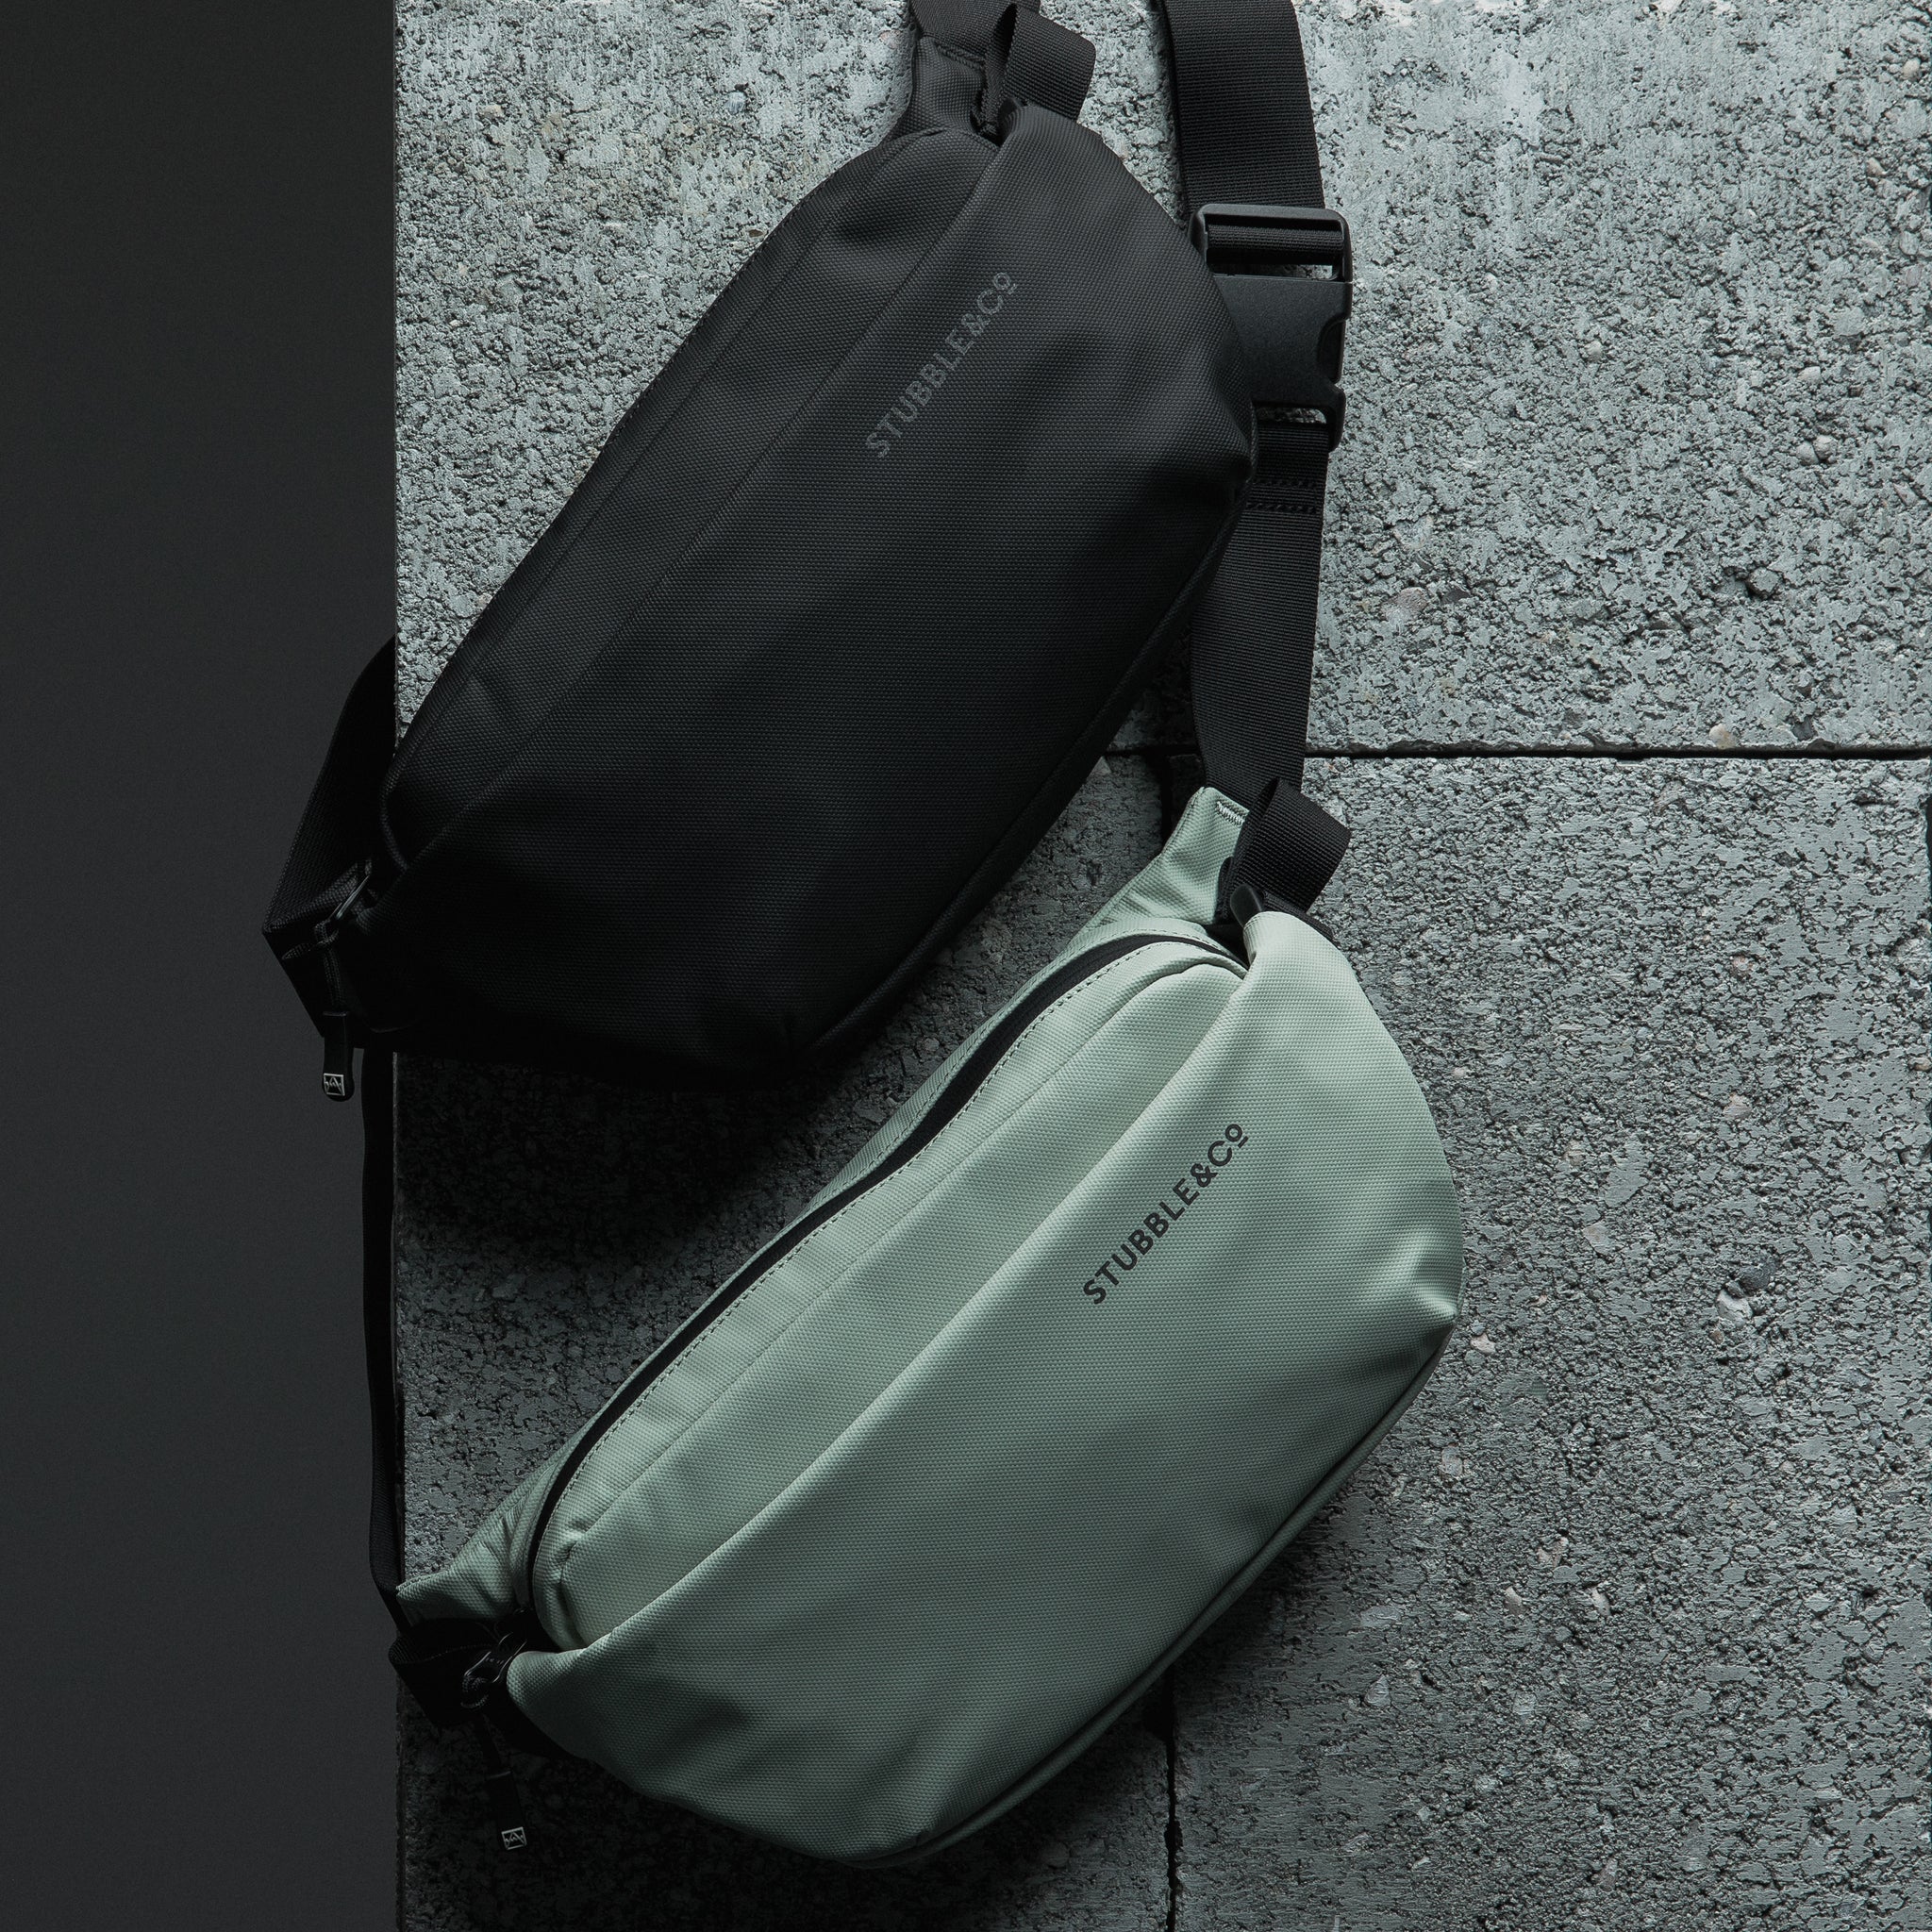 A Matcha green and all black crossbody hanging on a concrete block